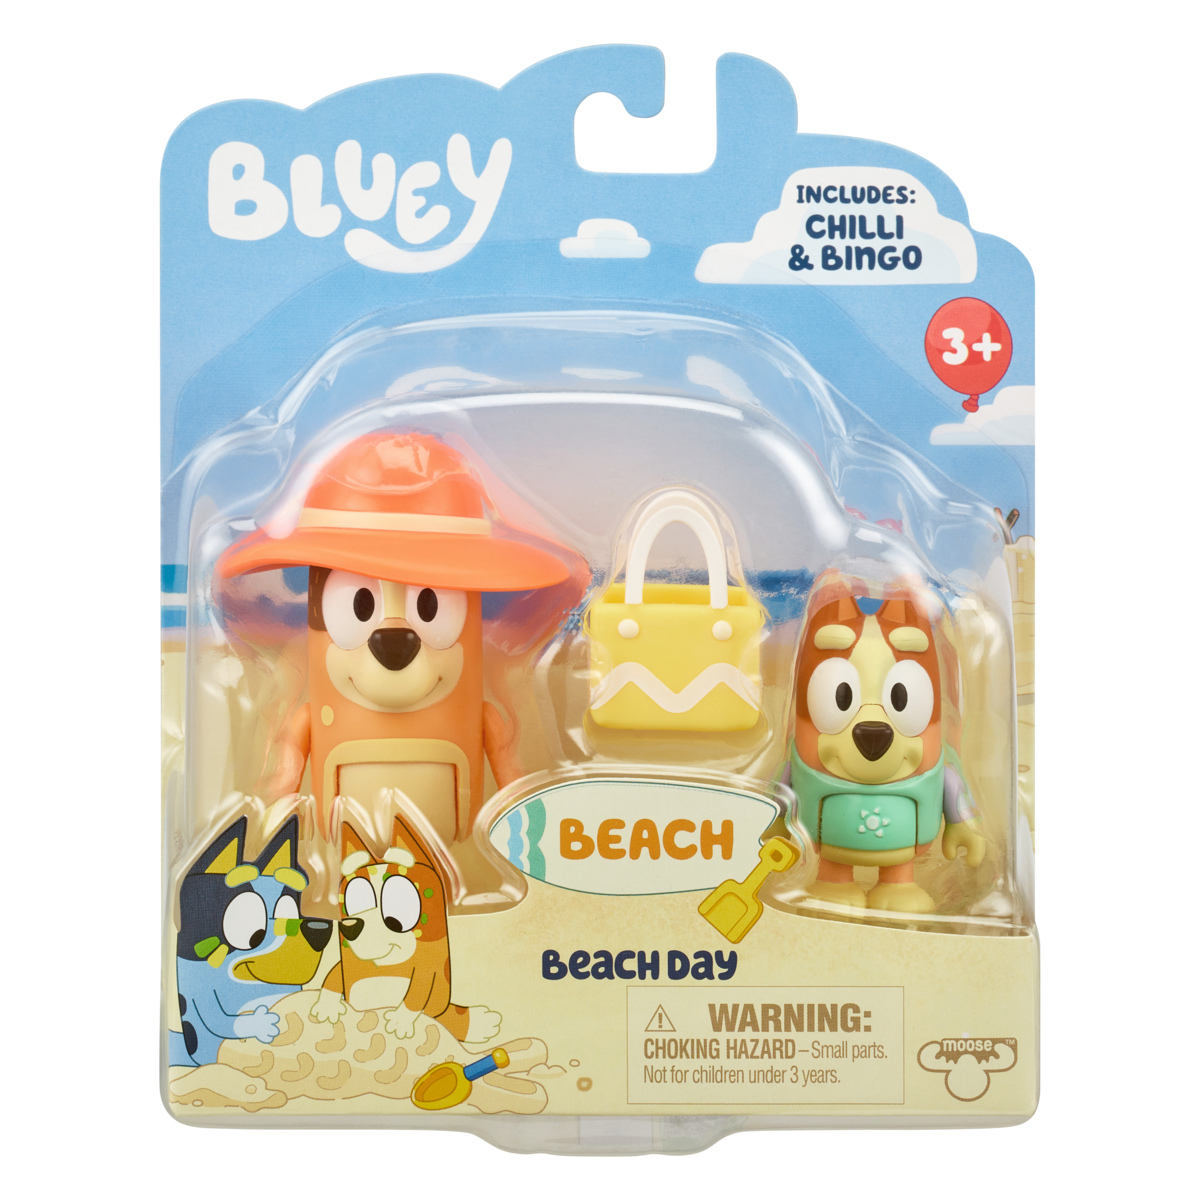 Bluey - Moose Toys - Bring the fun home with Bluey figures and plush toys!